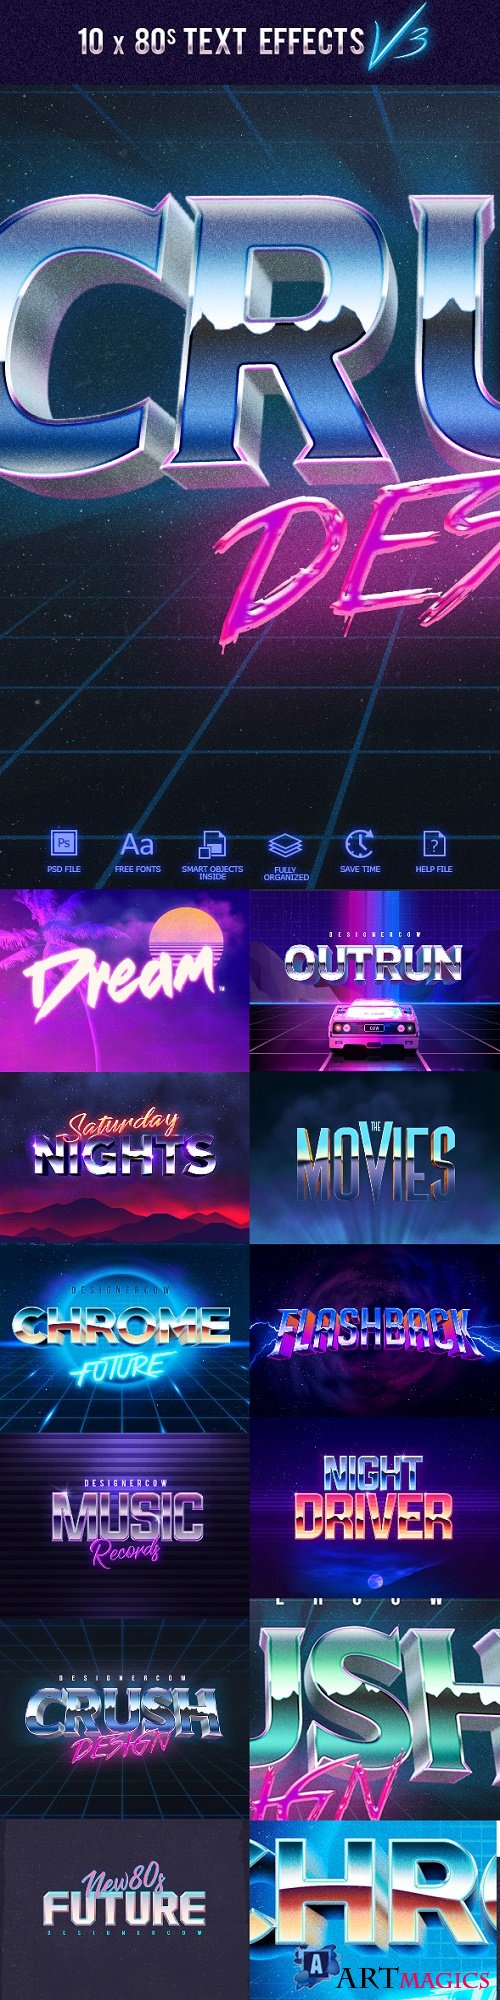 80s Text Effects V3 - 22484165